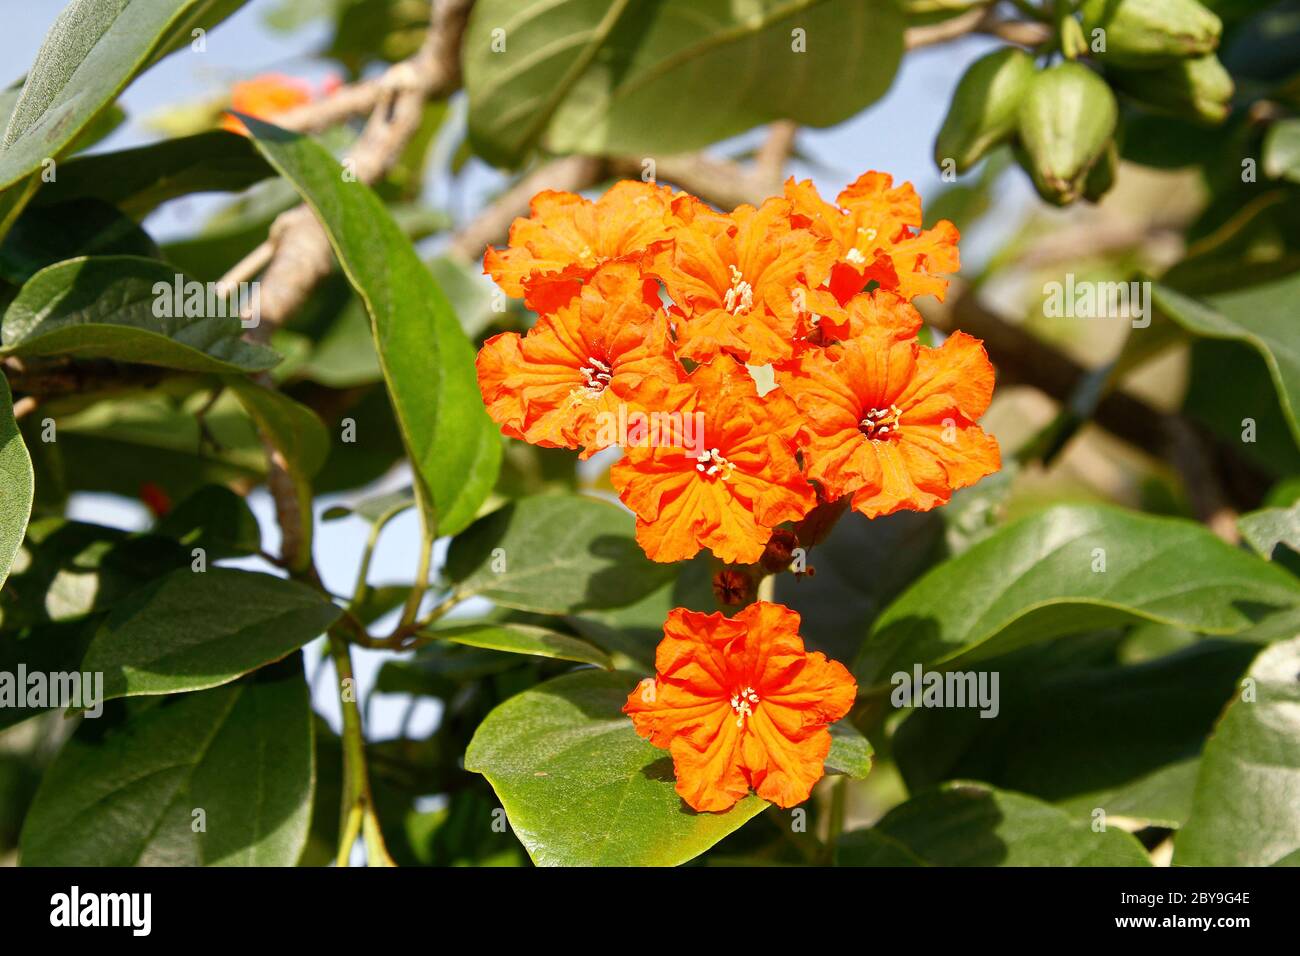 orange flower clusters, geiger tree, Cordia sebestena, tropical, showy, bright blossoms, green leaves, Florida Stock Photo